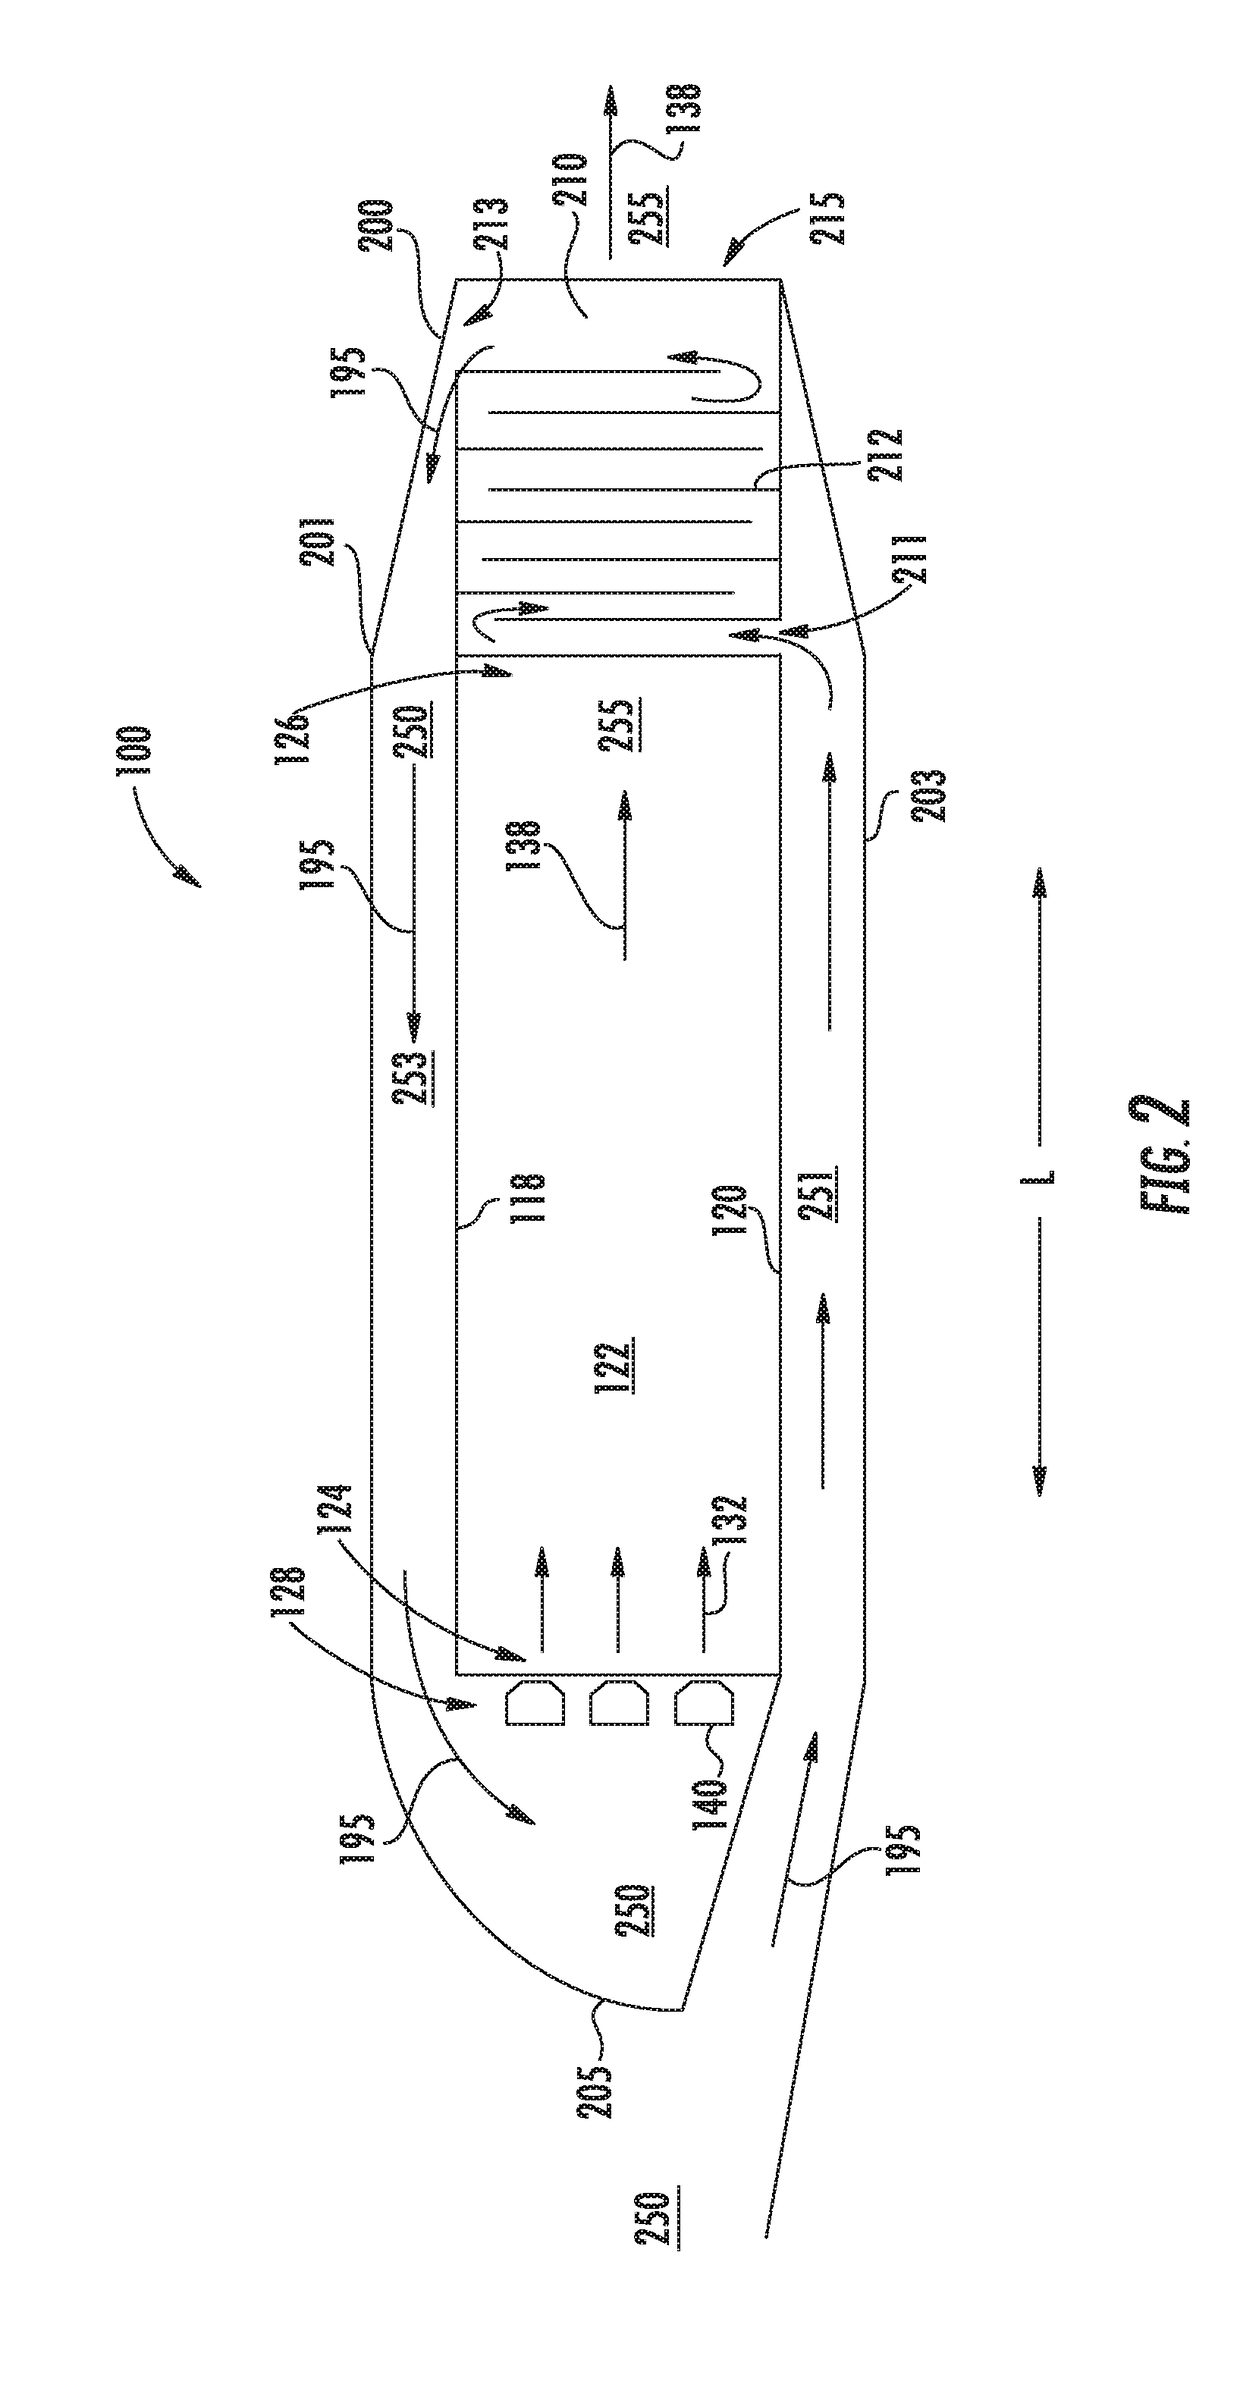 Combustion Section Heat Transfer System for a Propulsion System